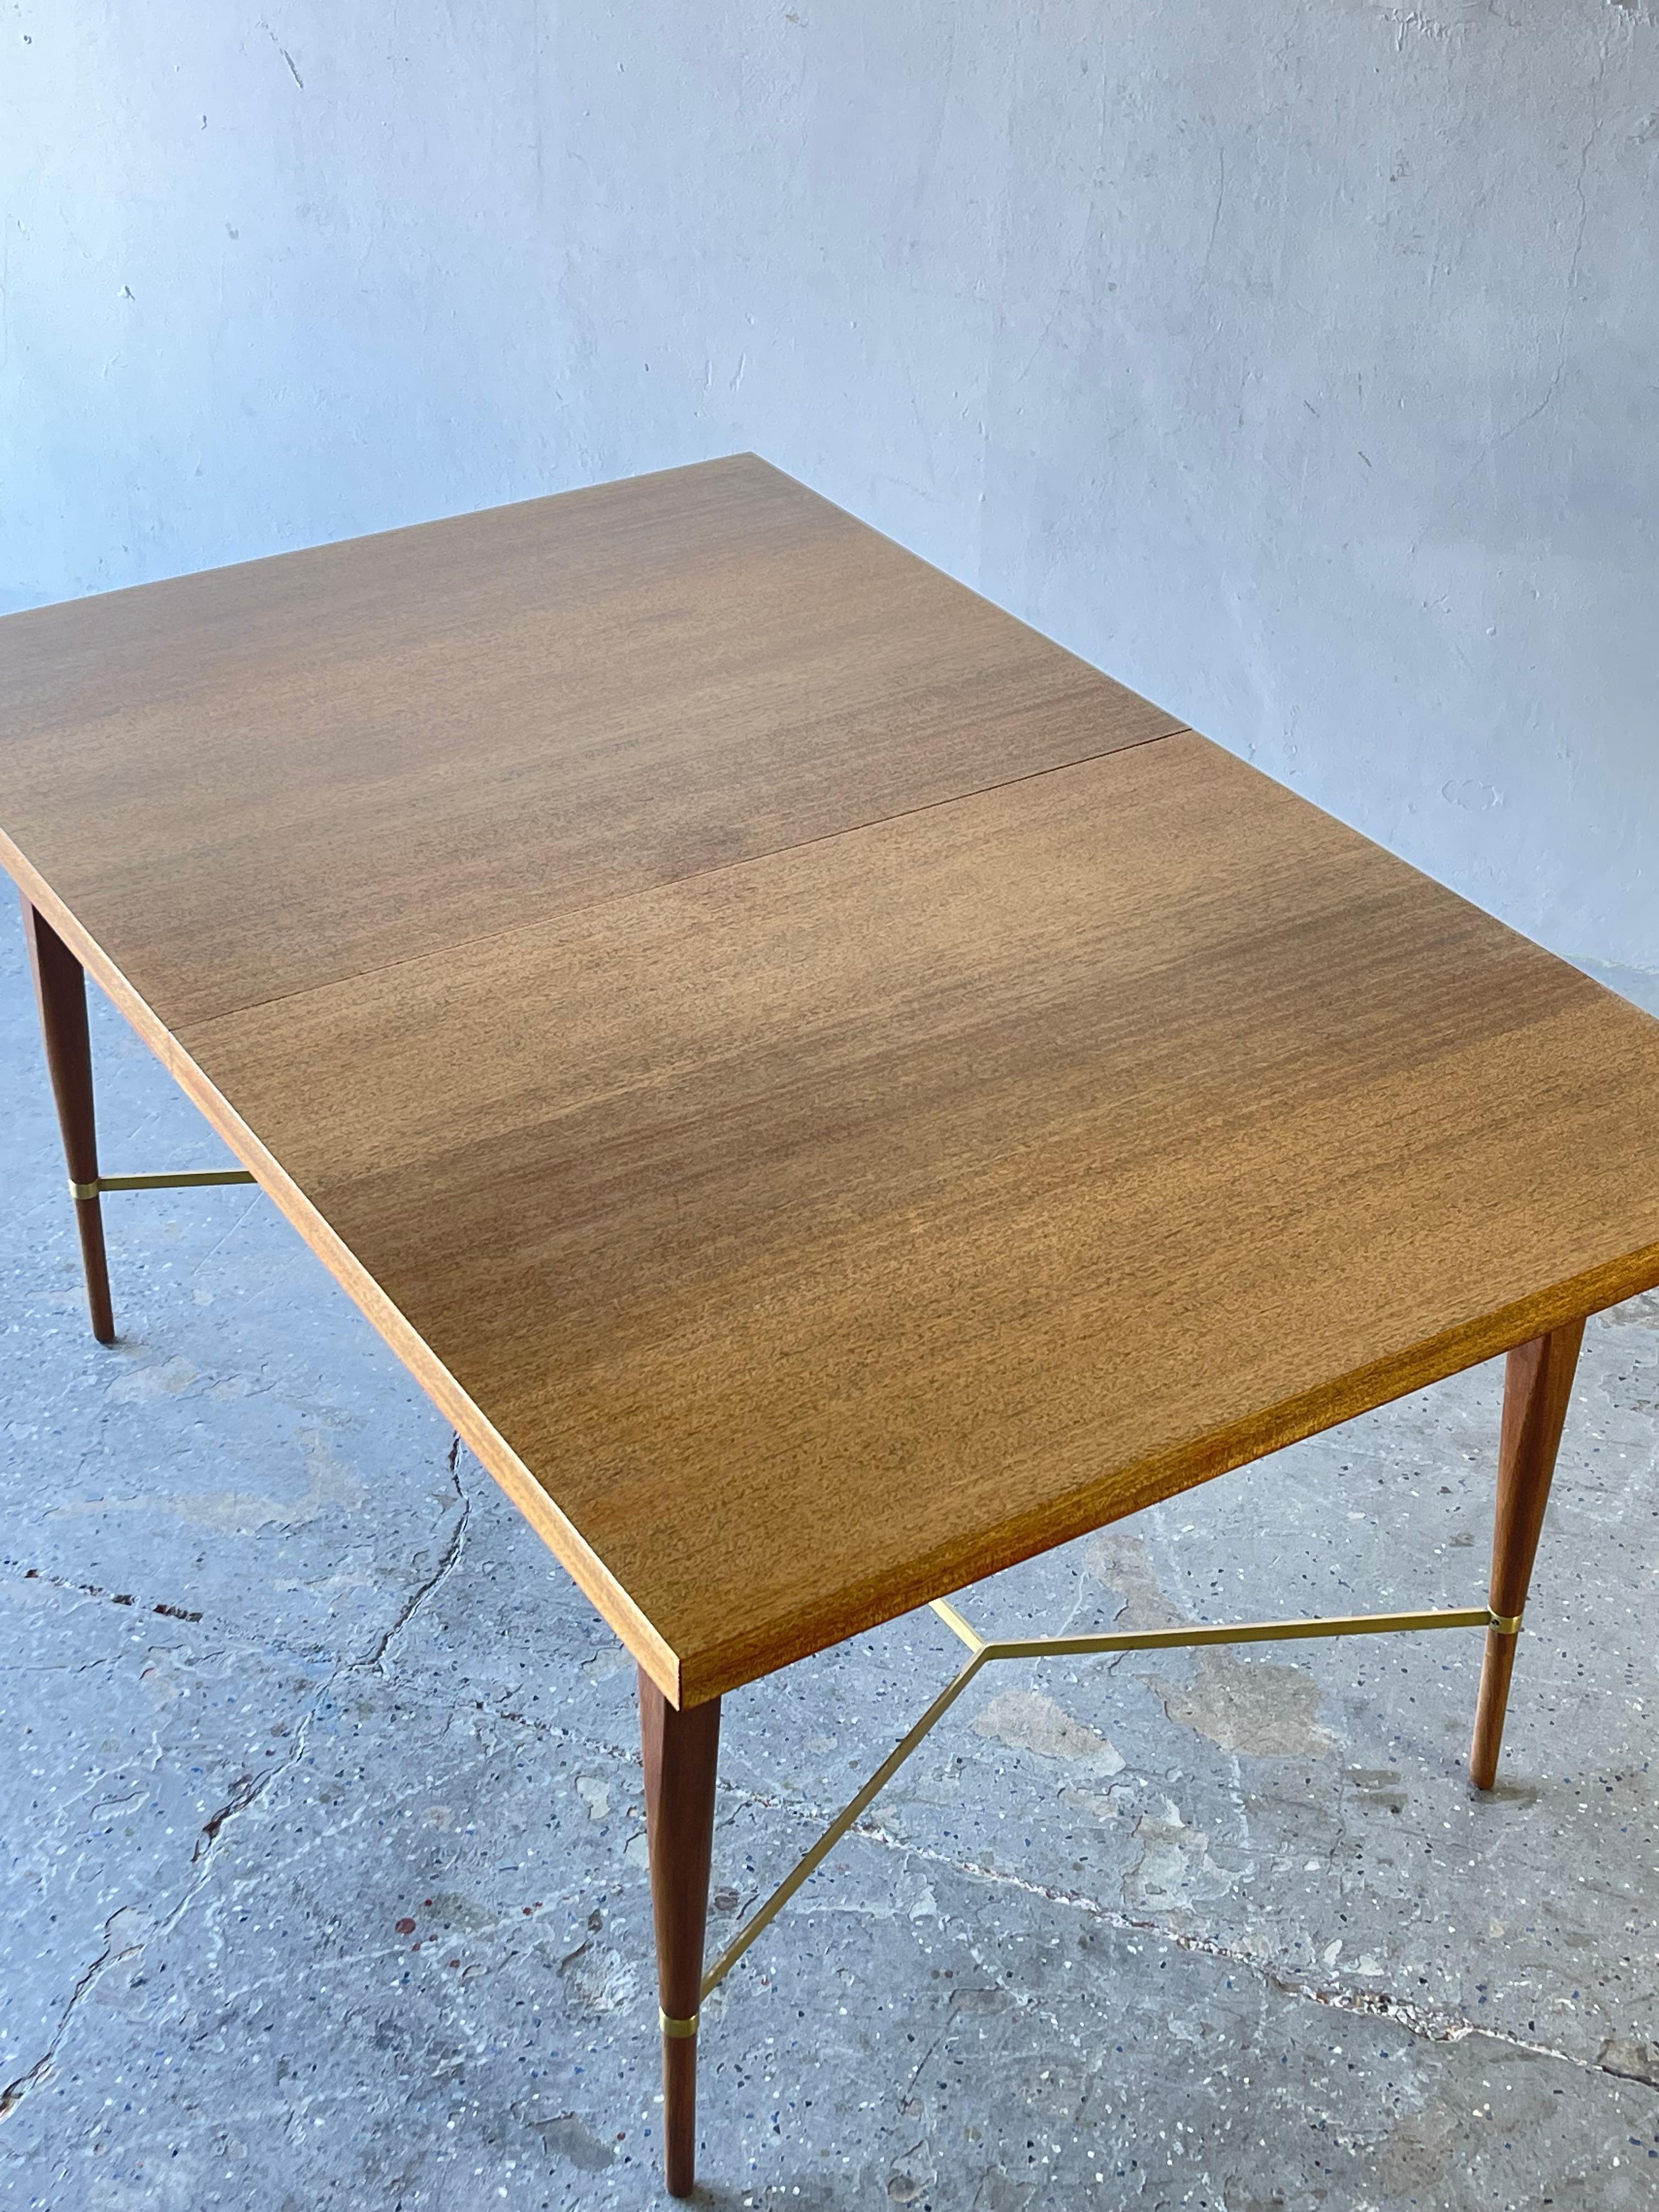 1950s mahogany & brass X cross support extension dining table by Paul McCobb.

A very handsome vintage 1950s extension dining table in mahogany with brass stretcher by Paul McCobb for Calvin. Nice size and details with two extension